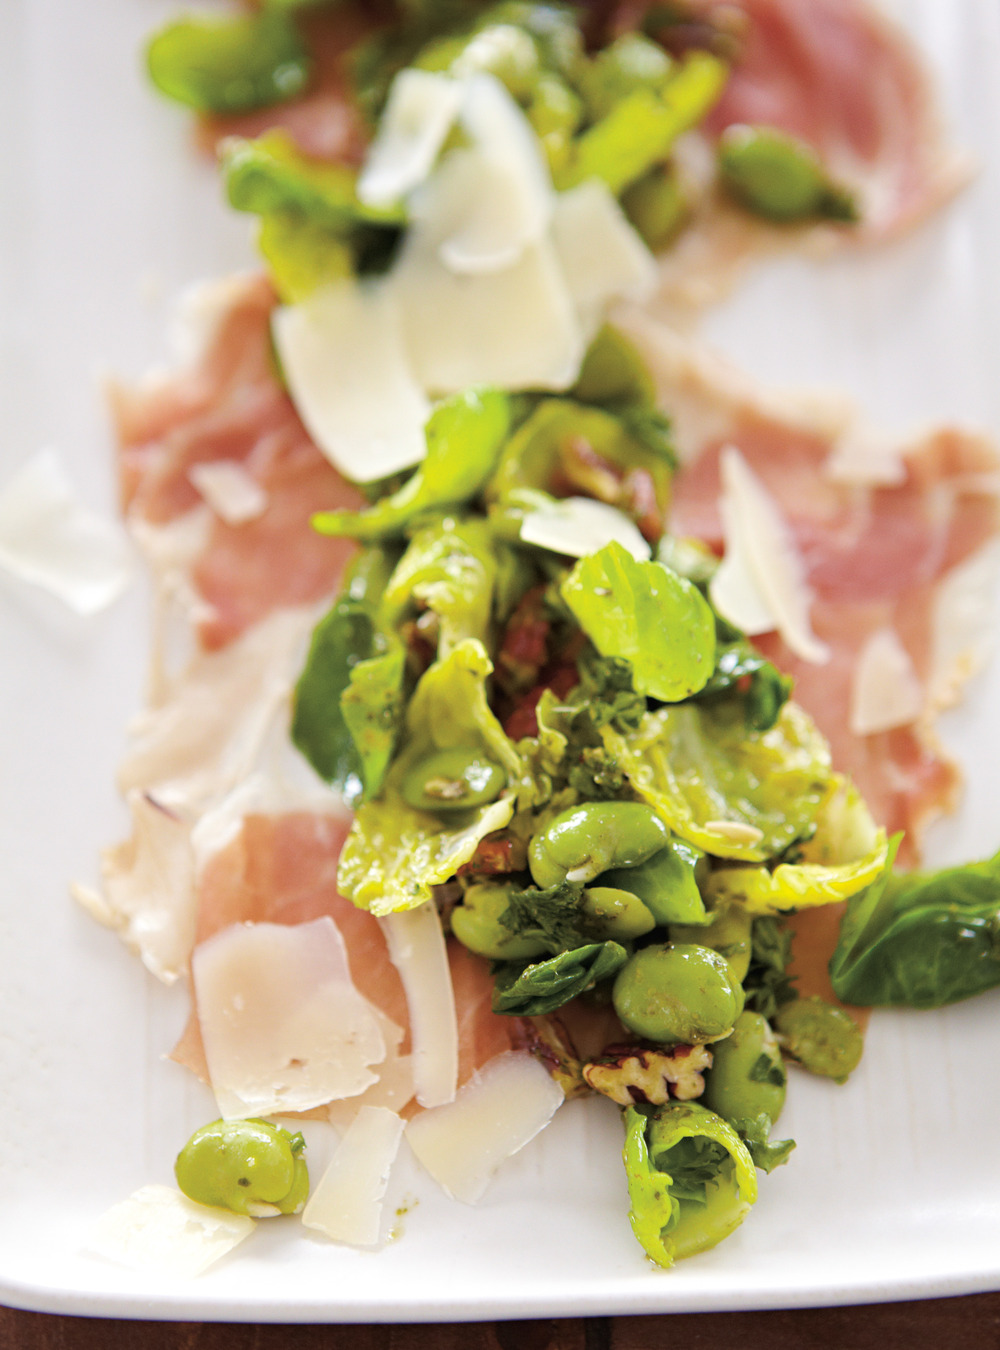 David Forbes’ Fava Bean, Prosciutto and Brussels Sprouts Salad